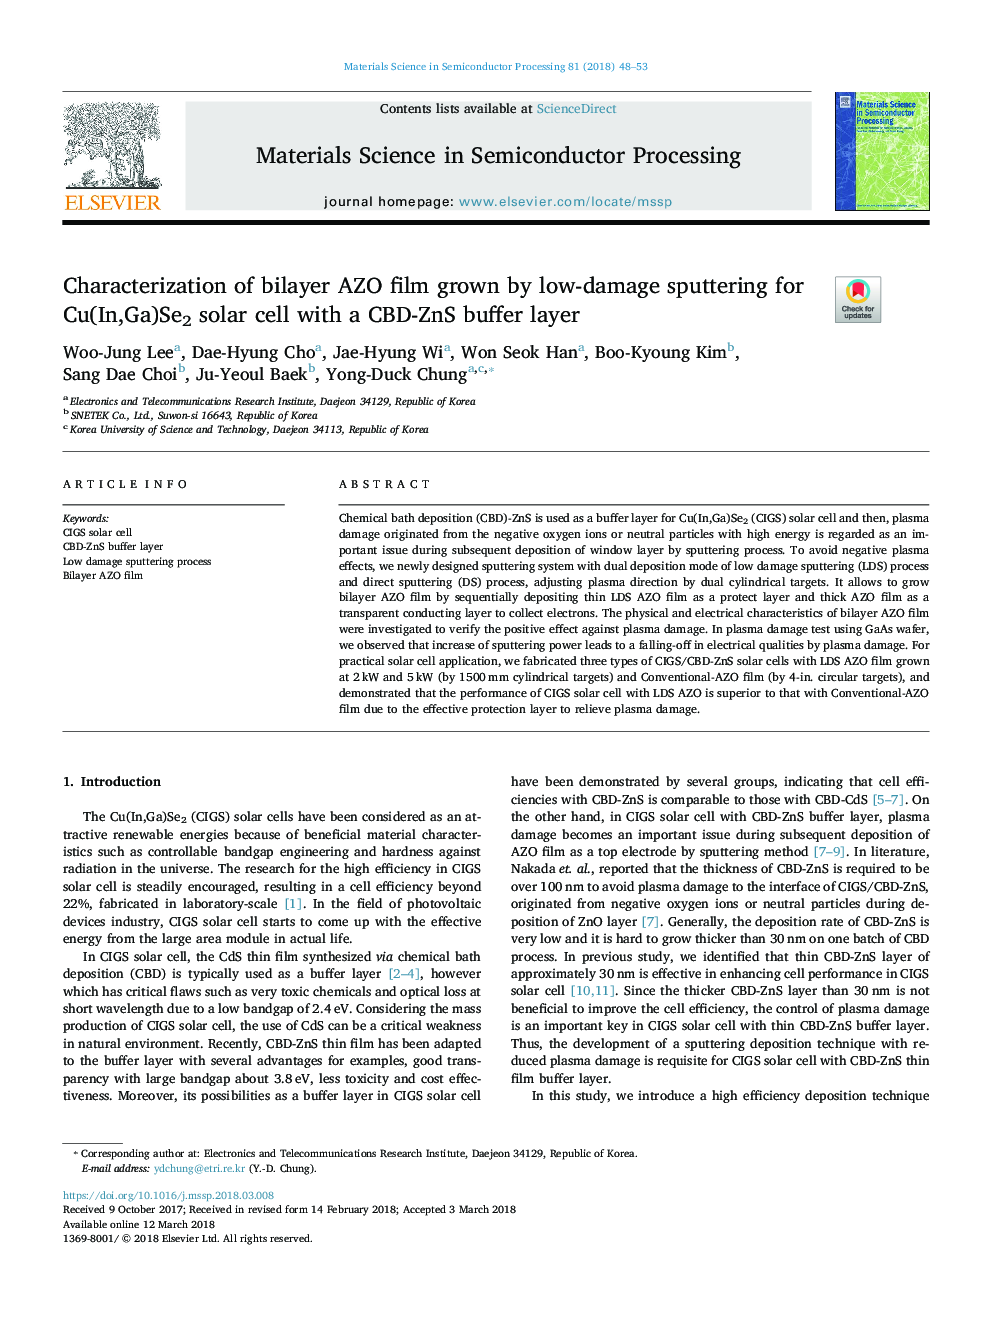 Characterization of bilayer AZO film grown by low-damage sputtering for Cu(In,Ga)Se2 solar cell with a CBD-ZnS buffer layer